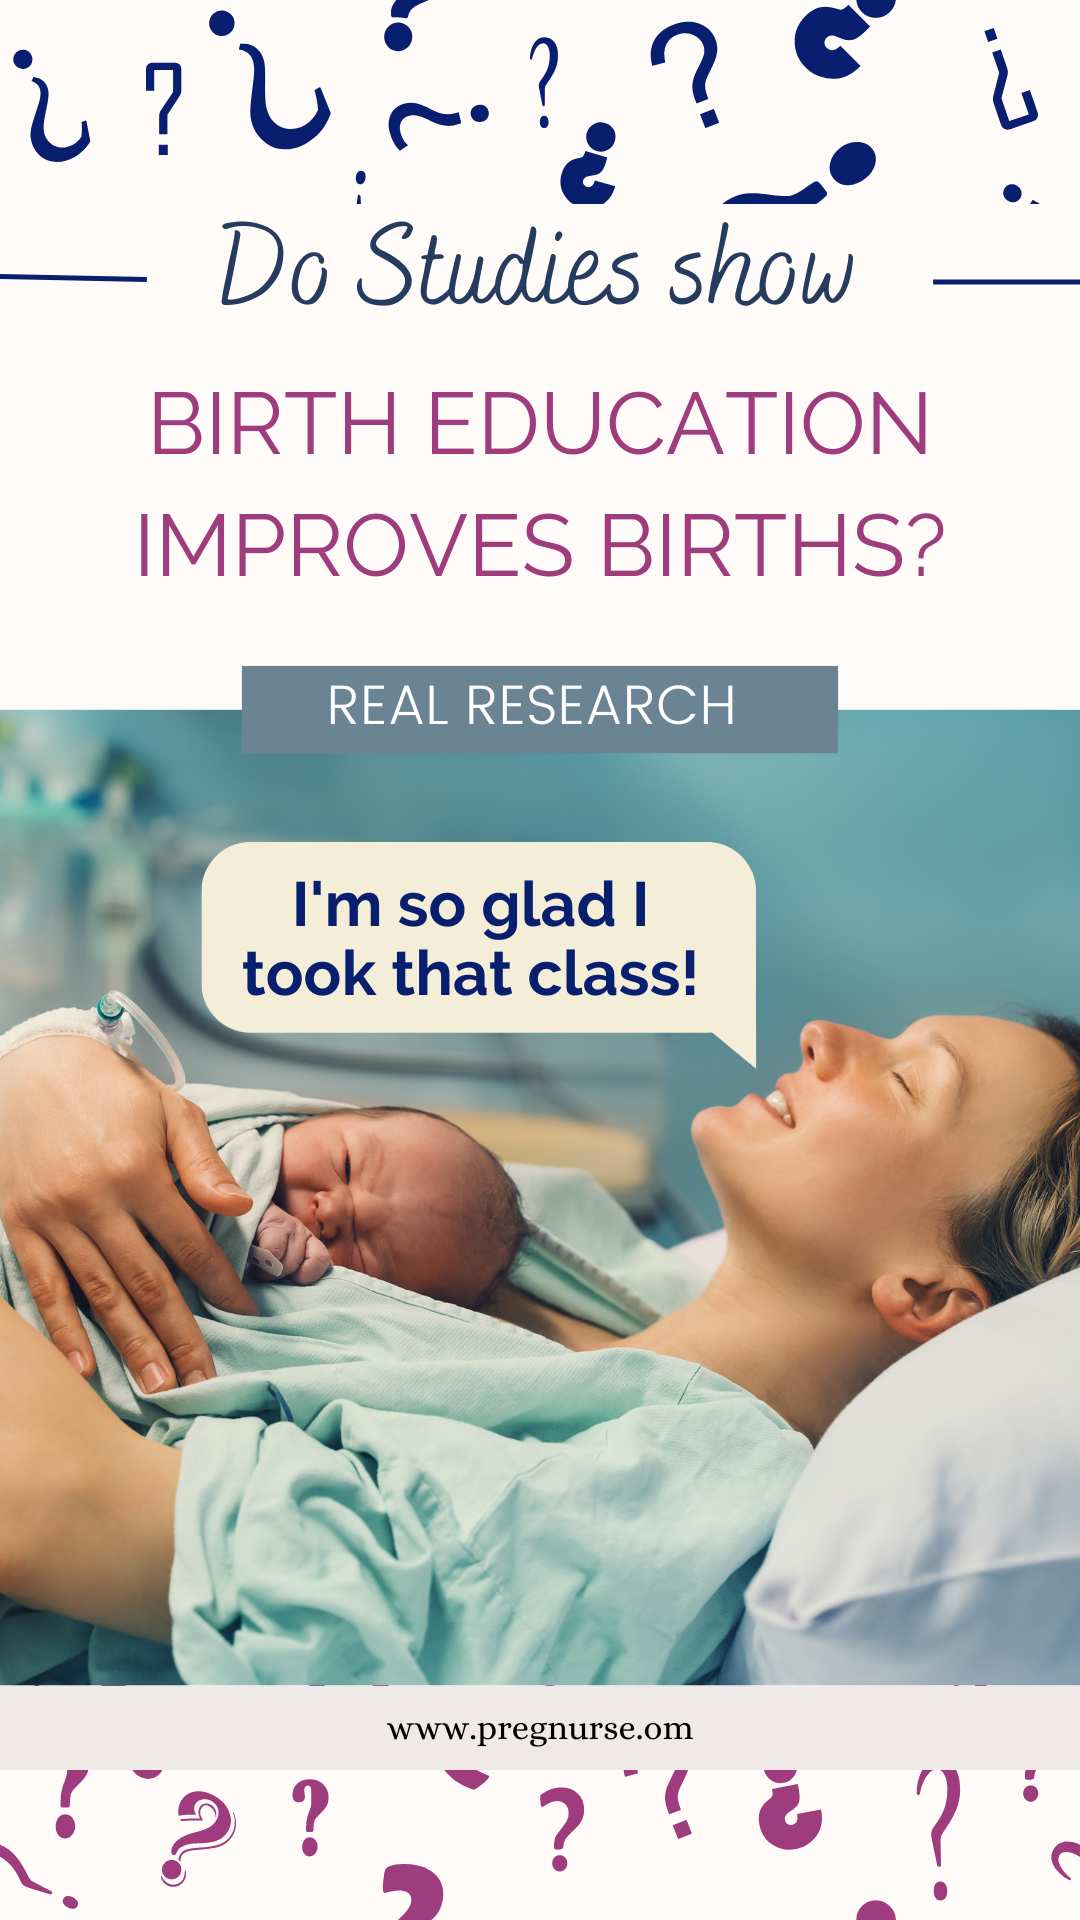 Thinking of having a baby? Did you know that taking a childbirth class can help make the process easier and more informed? Studies have shown that those who prepare with a birth class have positive outcomes overall! #ChildbirthClass #PrenatalClasses #BirthClasses #PregnancyClasses #InformedBirthing